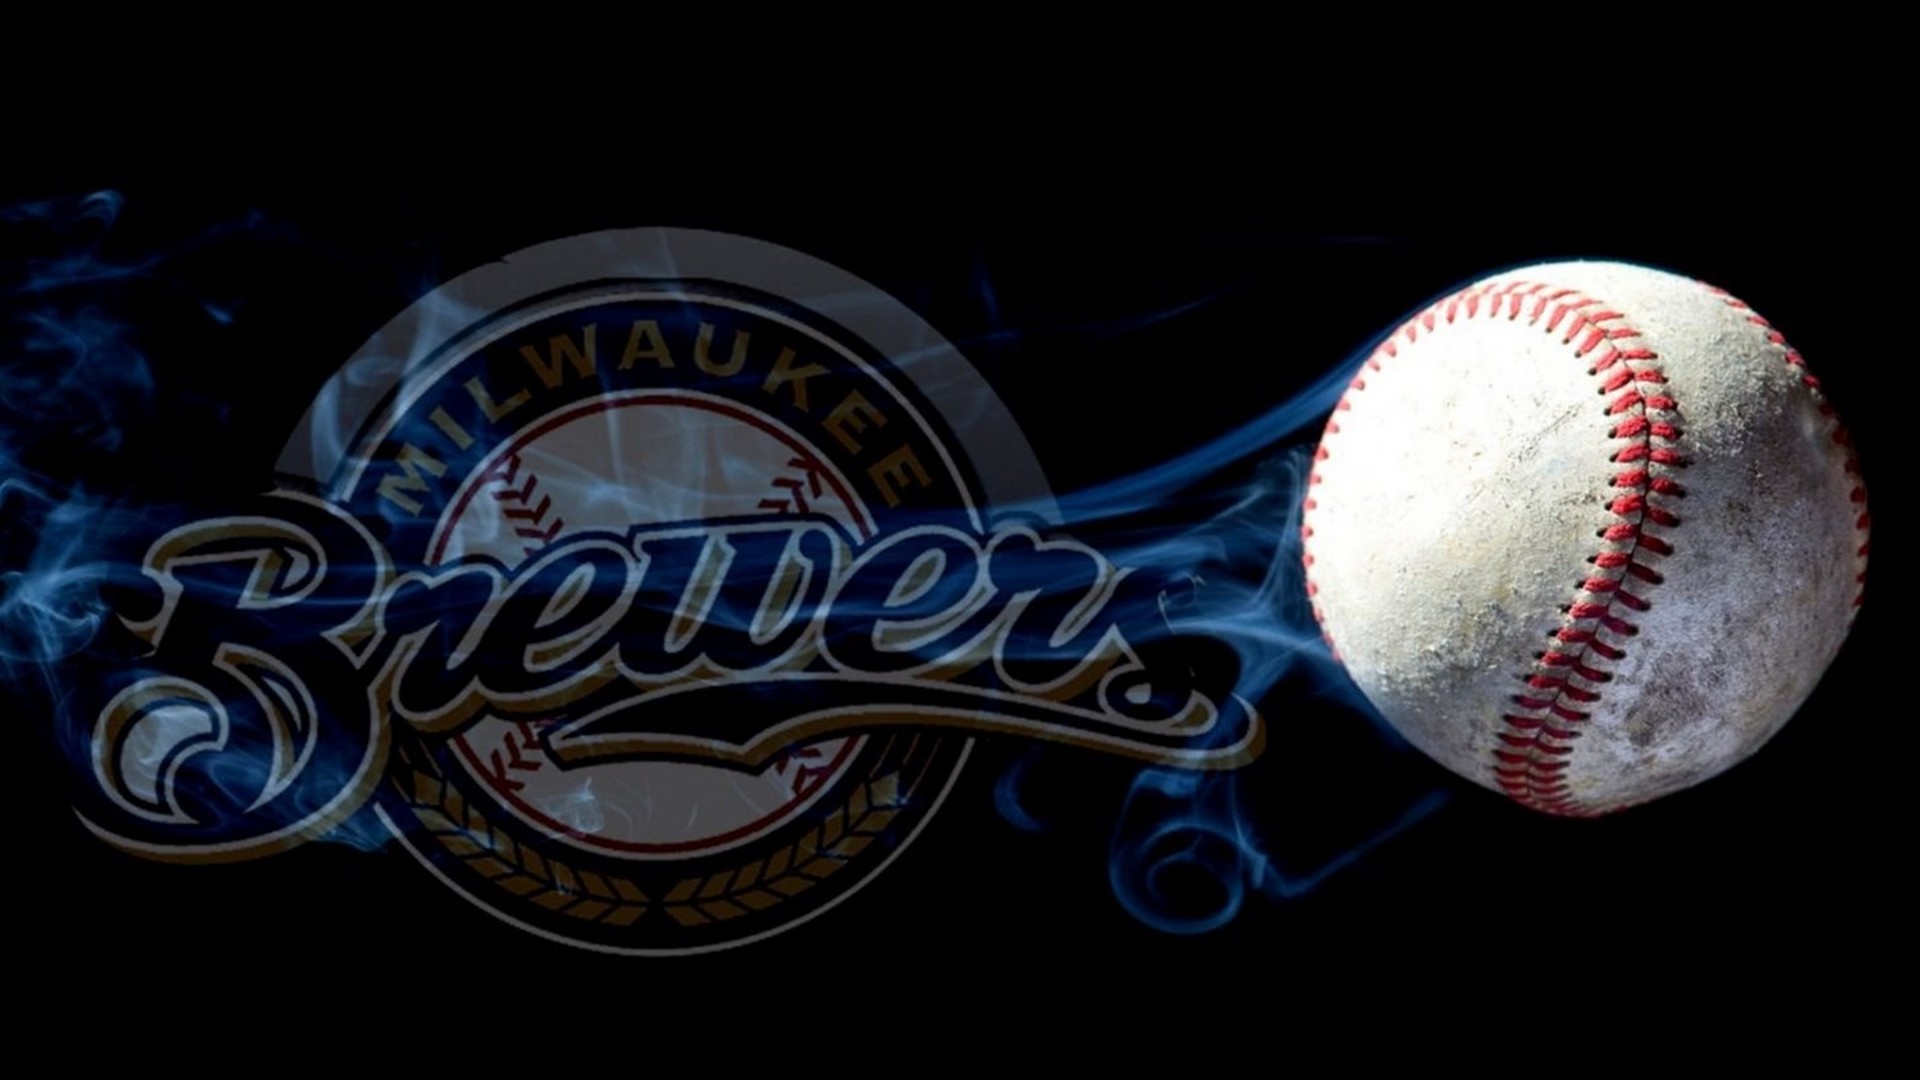 Milwaukee Brewers Laptop Wallpaper with high-resolution 1920x1080 pixel. You can use this wallpaper for Mac Desktop Wallpaper, Laptop Screensavers, Android Wallpapers, Tablet or iPhone Home Screen and another mobile phone device